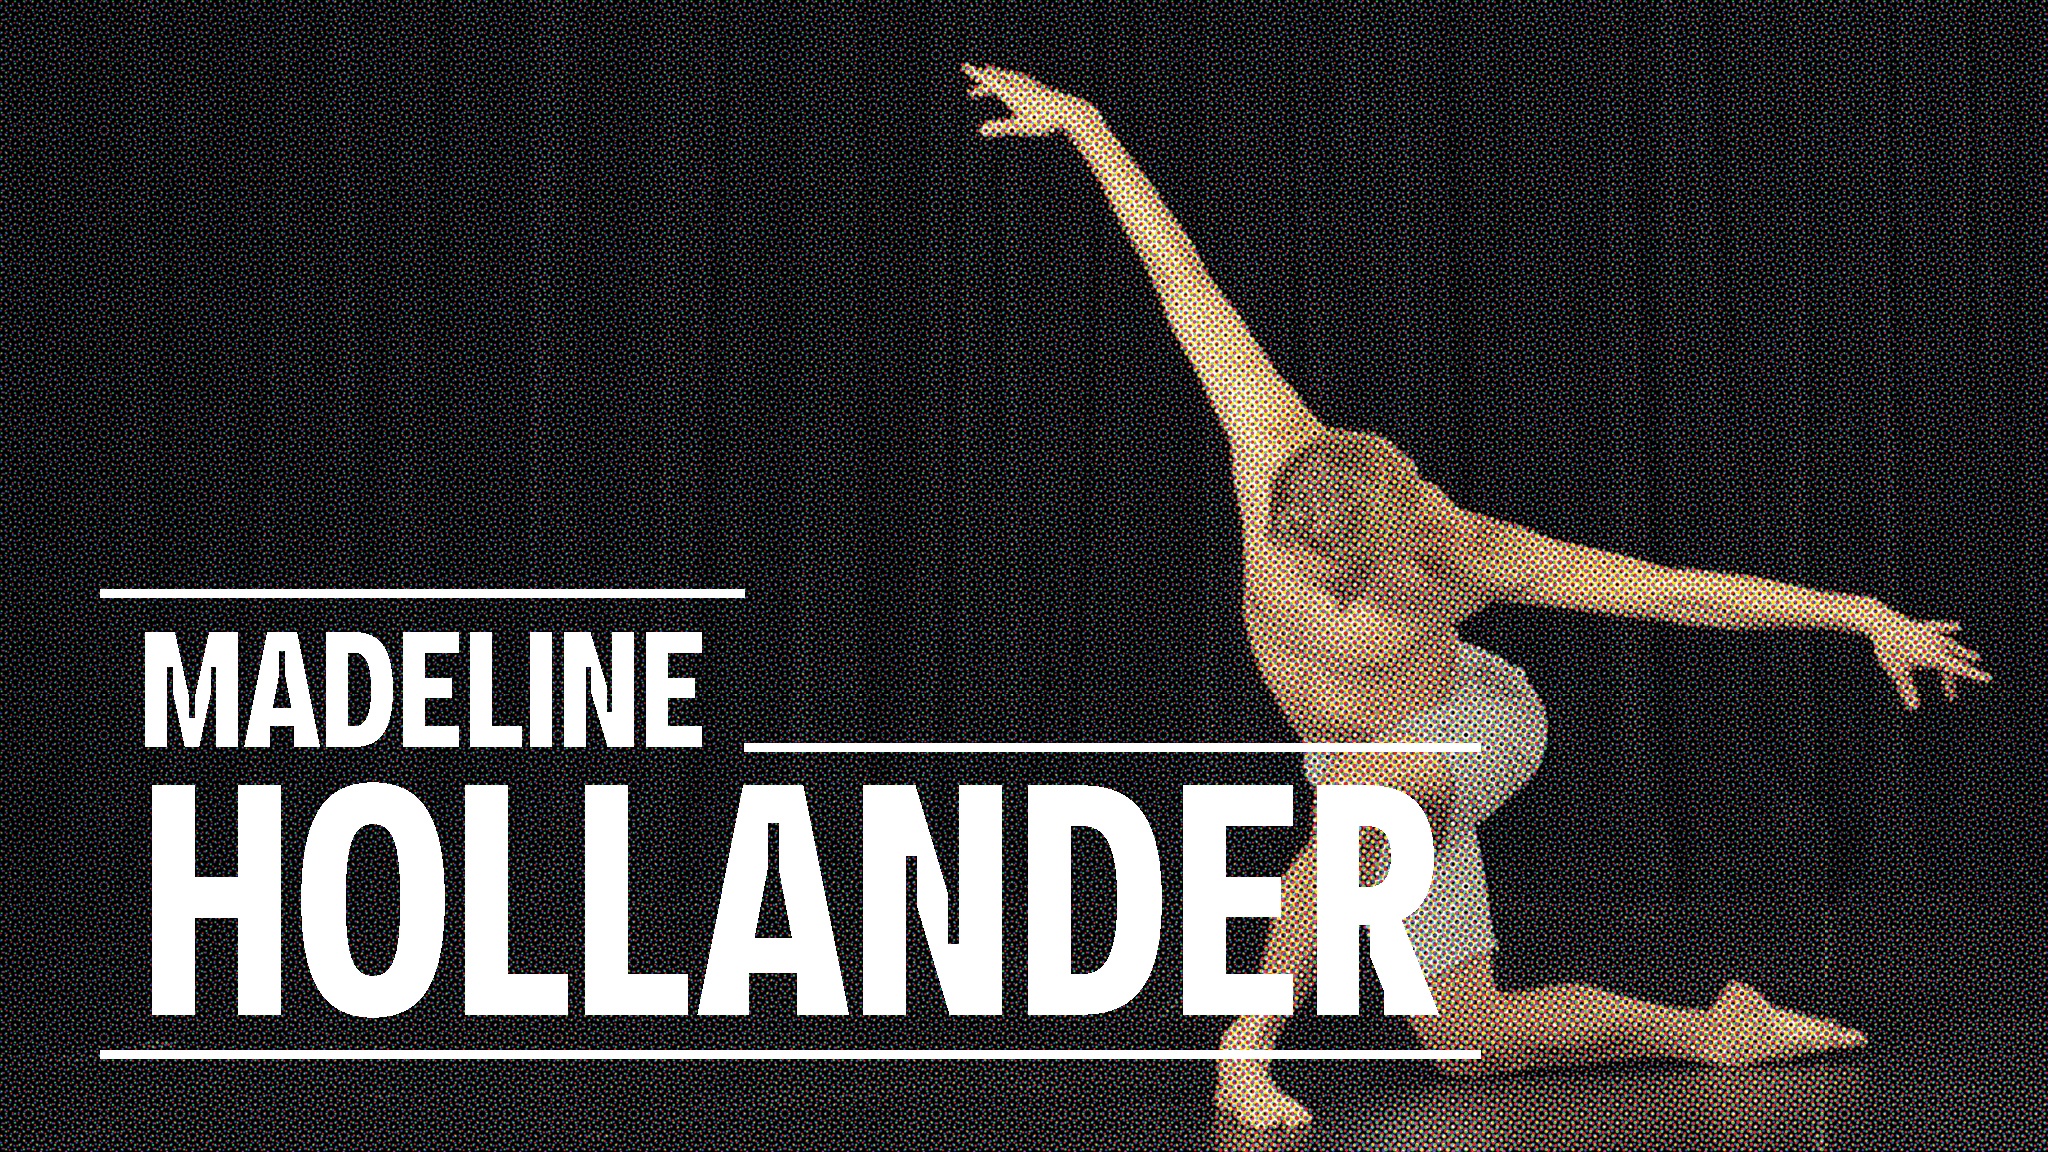 The name "Madeline Hollander" is overlaid in white type on an image of a male ballet dancer wearing shorts but no shirt. He bows deeply against a black background. His arms are fully extended and he rests his weight on one knee. His head is lowered so that his face is not visible. 